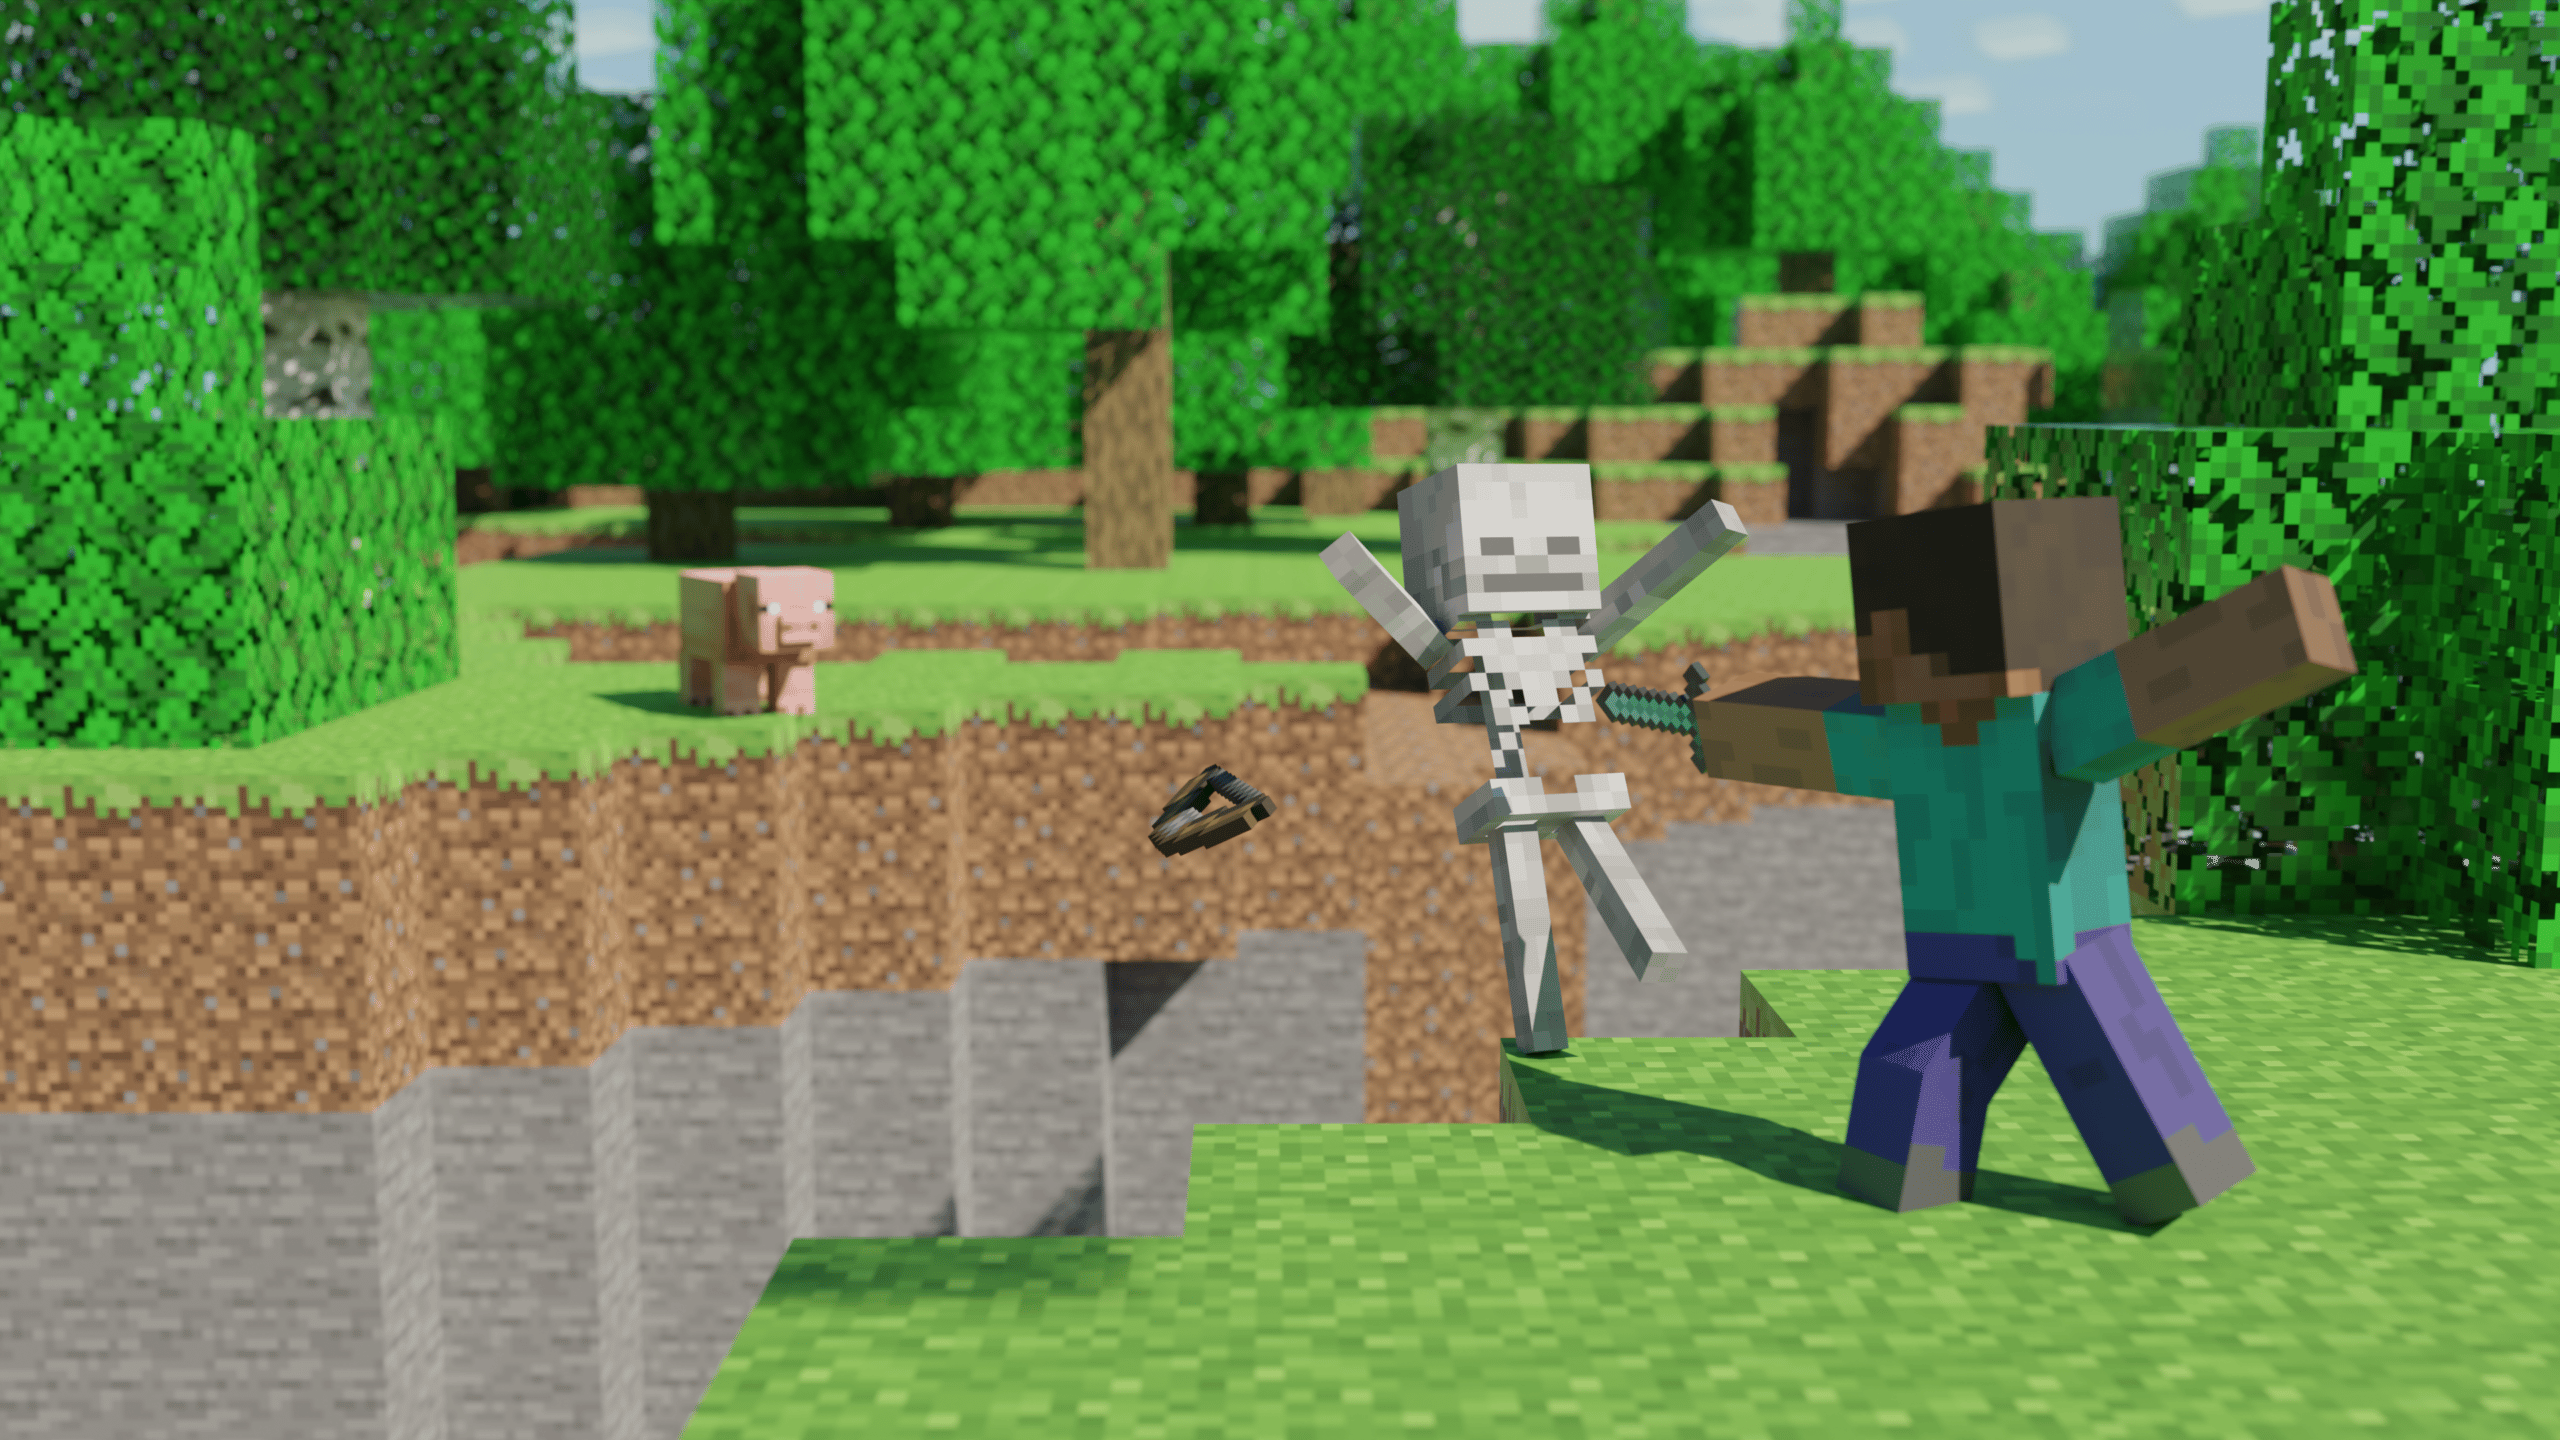 Minecraft characters fight off a zombie in a pixelated world. - Minecraft